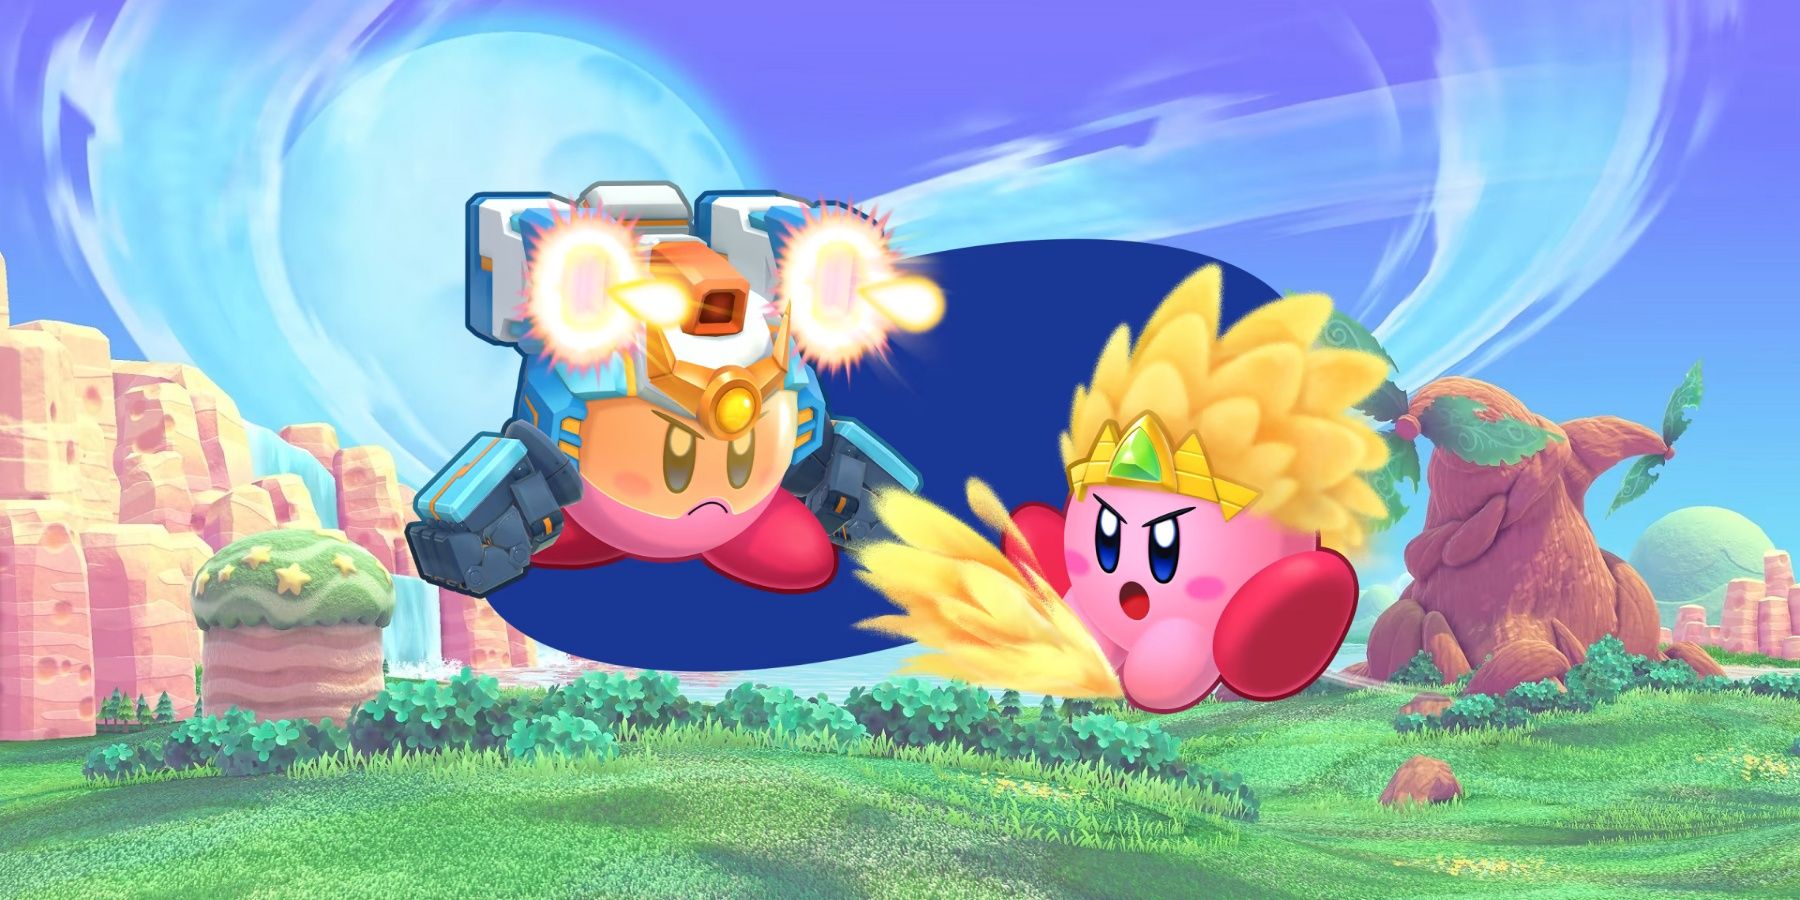 Kirby's Return to Dream Land Deluxe - Overview Trailer 